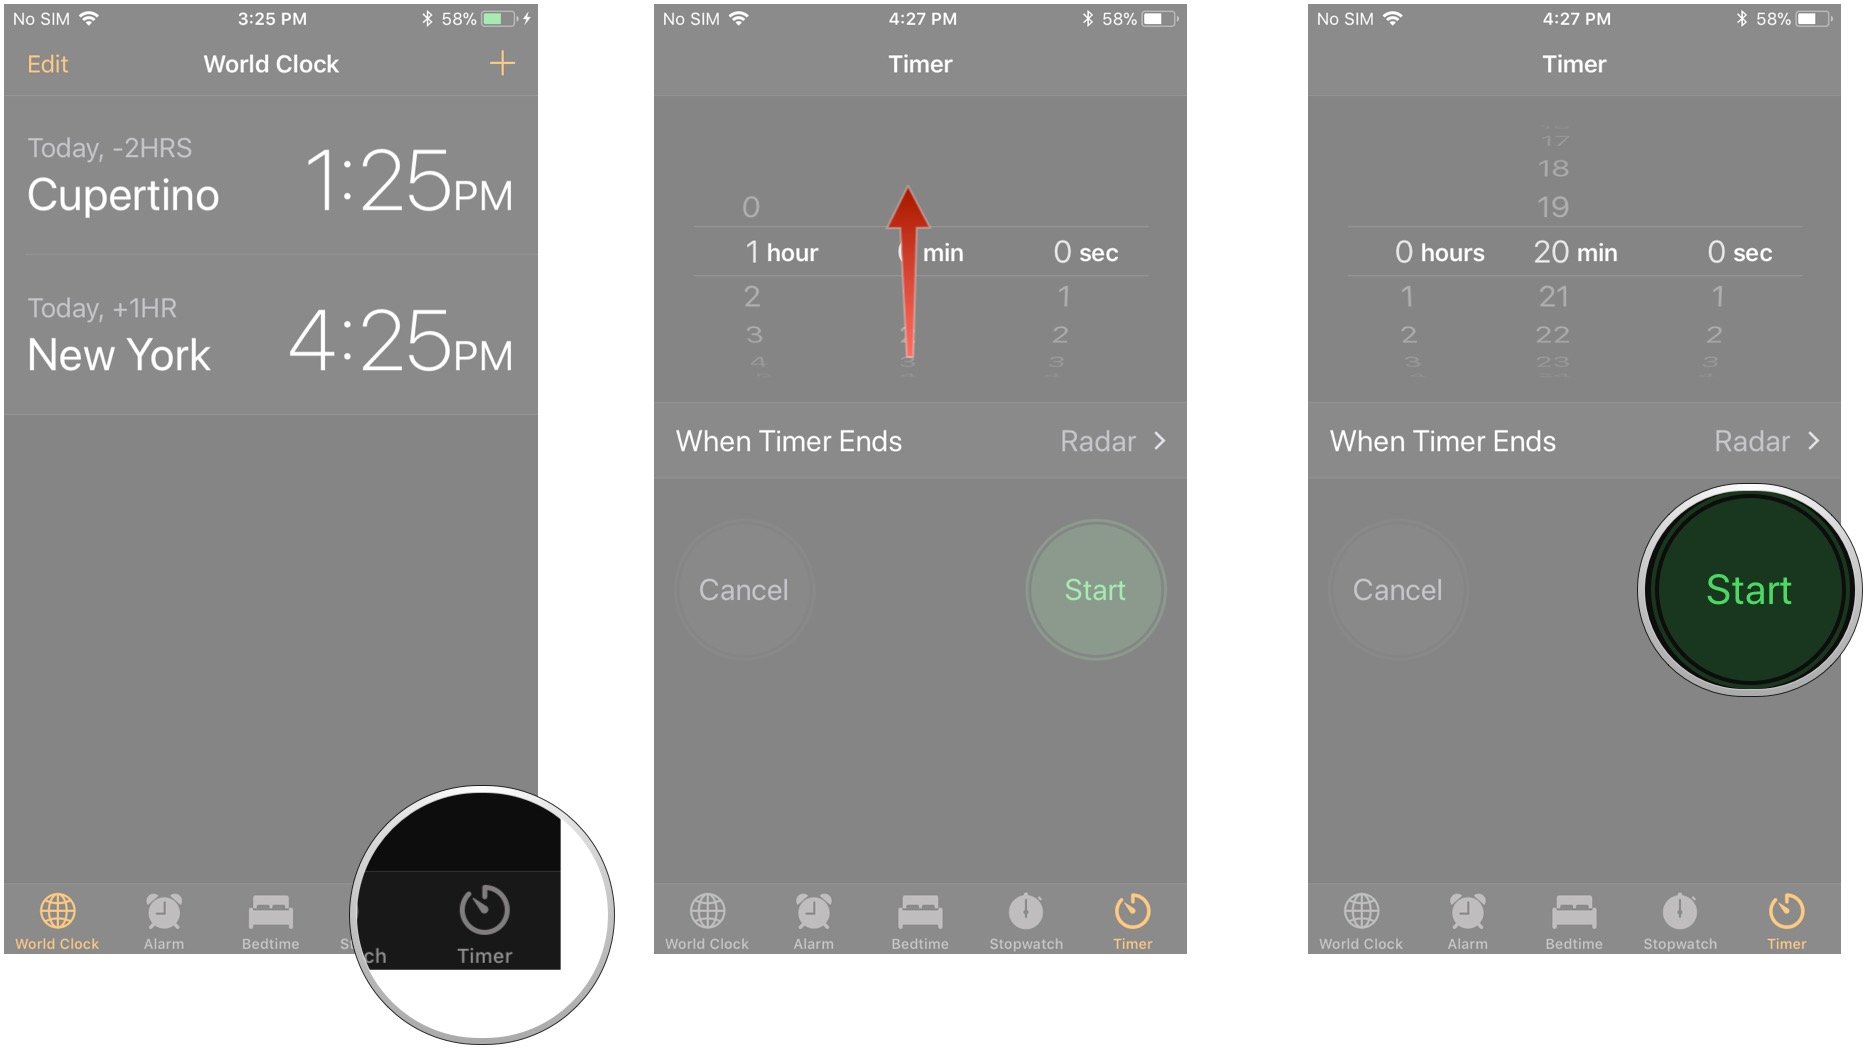 How to set a timer in iOS 15: Tap the Timer tab, swipe up and down to set the time, tap Start